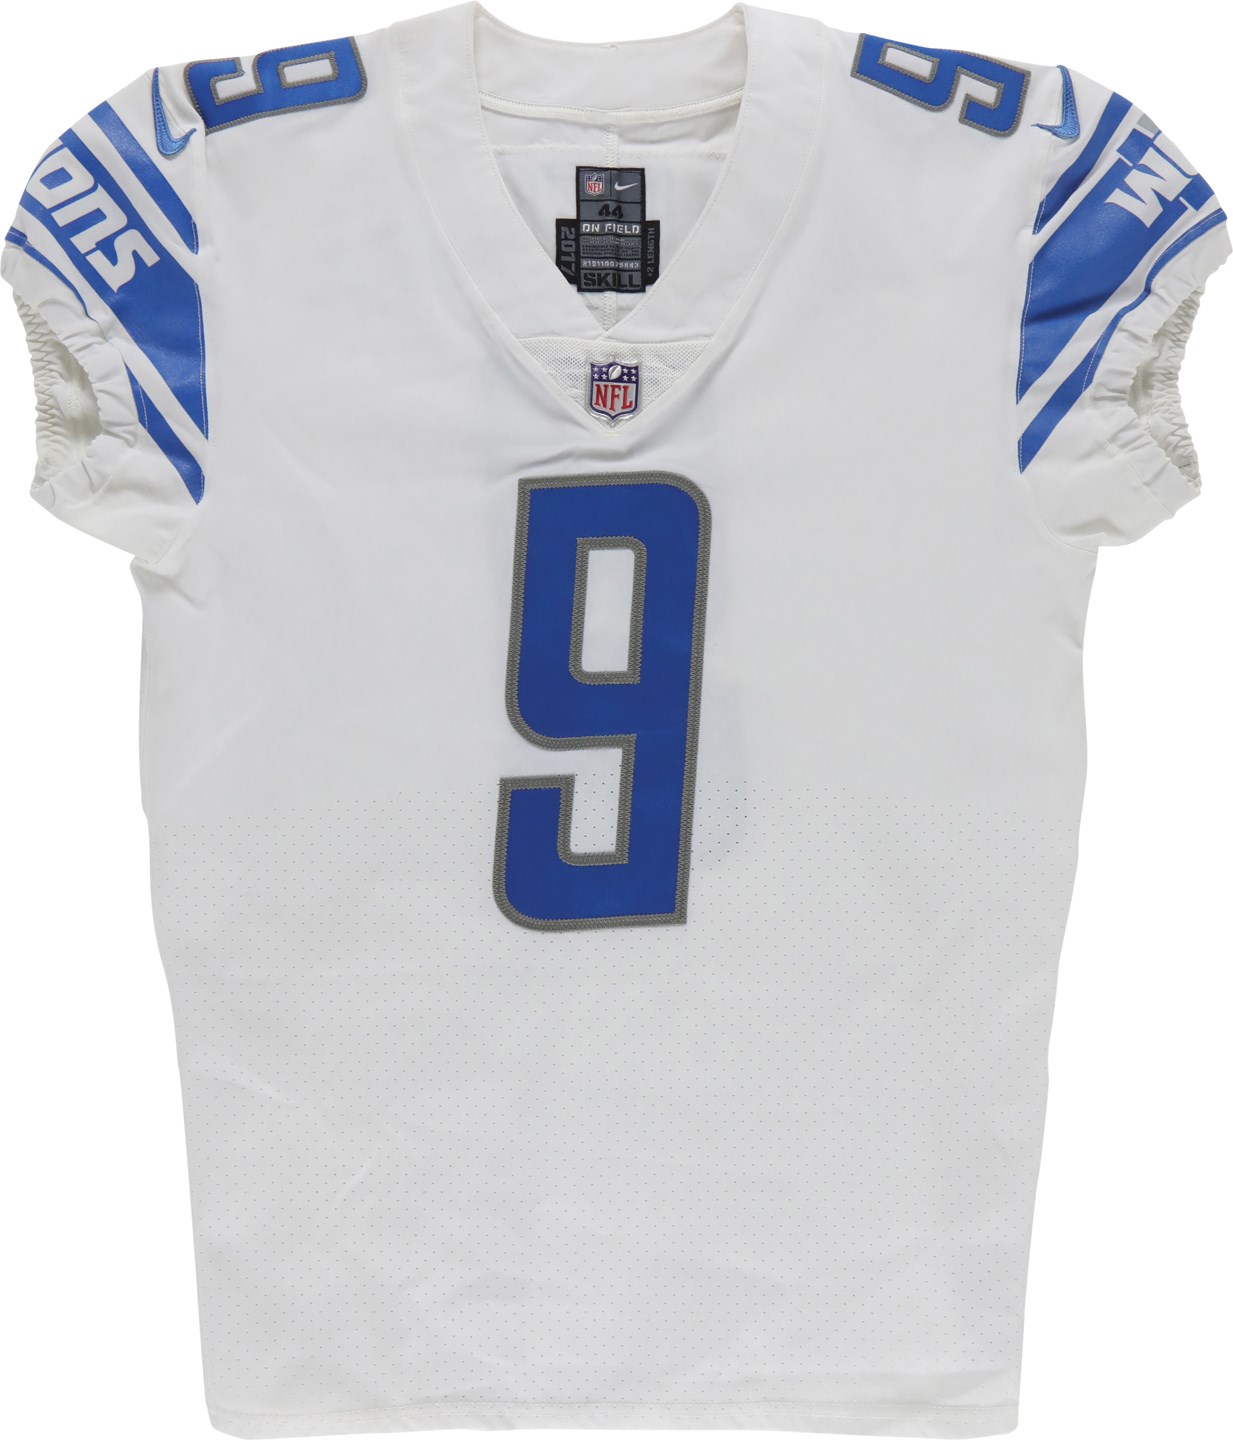 Football - 2017 Matthew Stafford Detroit Lions Game Jersey Signed & Inscribed to Adrian Peterson (PSA)